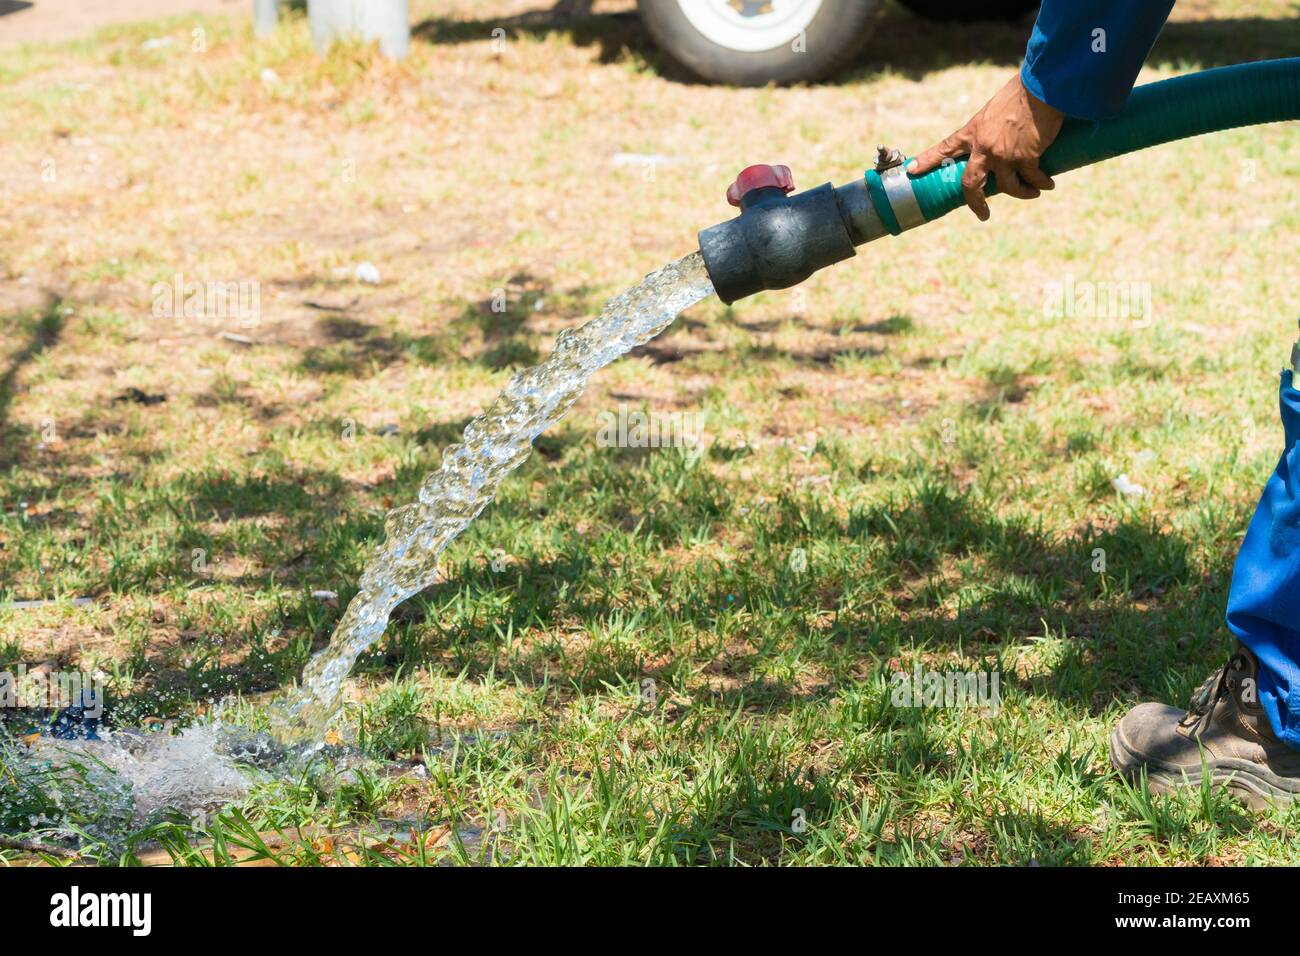 man's hand holding a large hosepipe with water running out of it while watering by hand during water restrictions and drought in South Africa Stock Photo